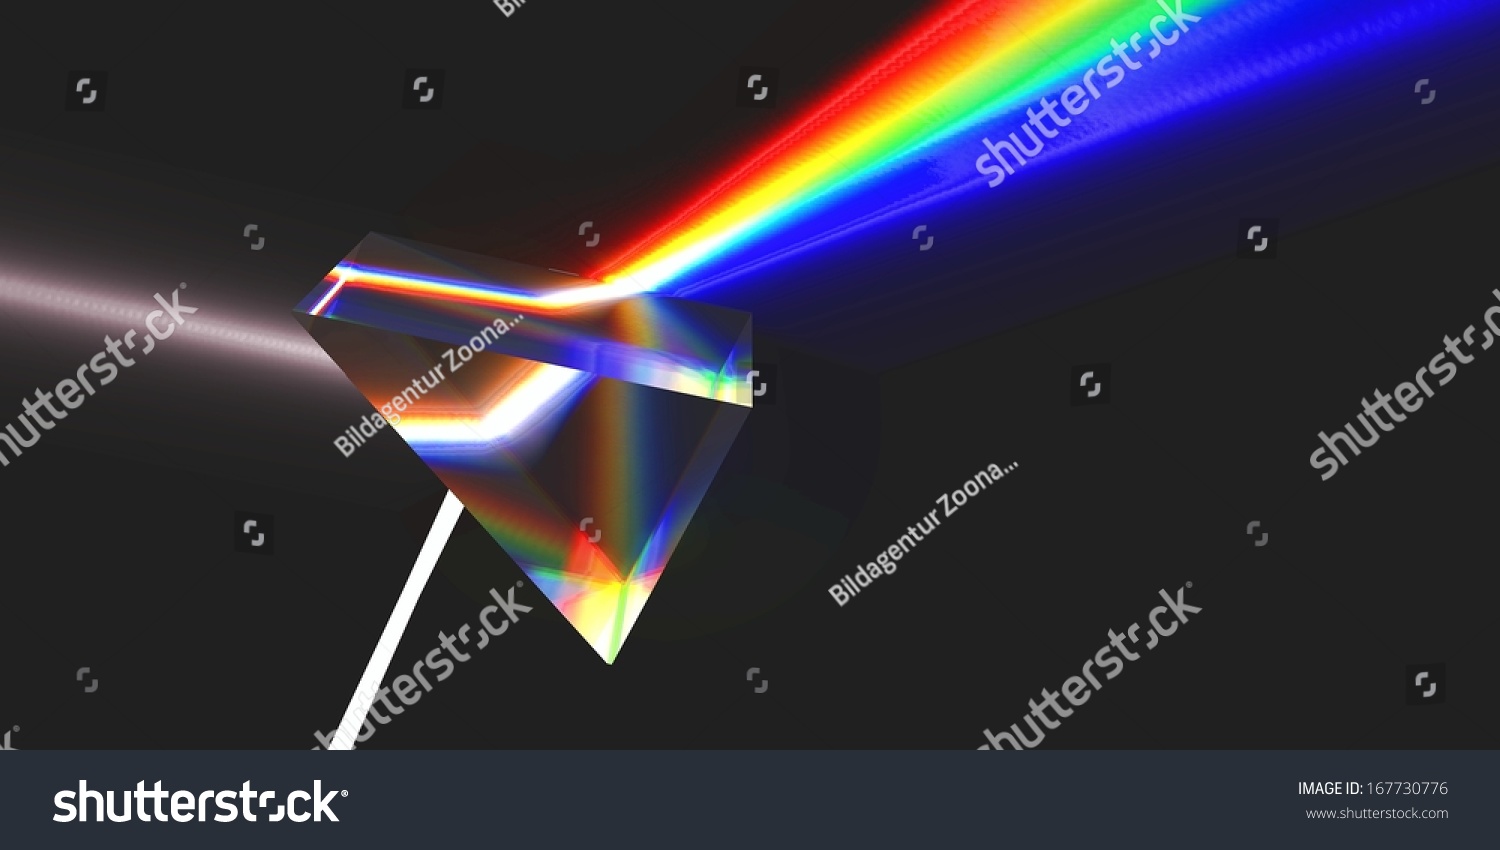 Optical Prism With Refraction (Rendering) Stock Photo 167730776 ...